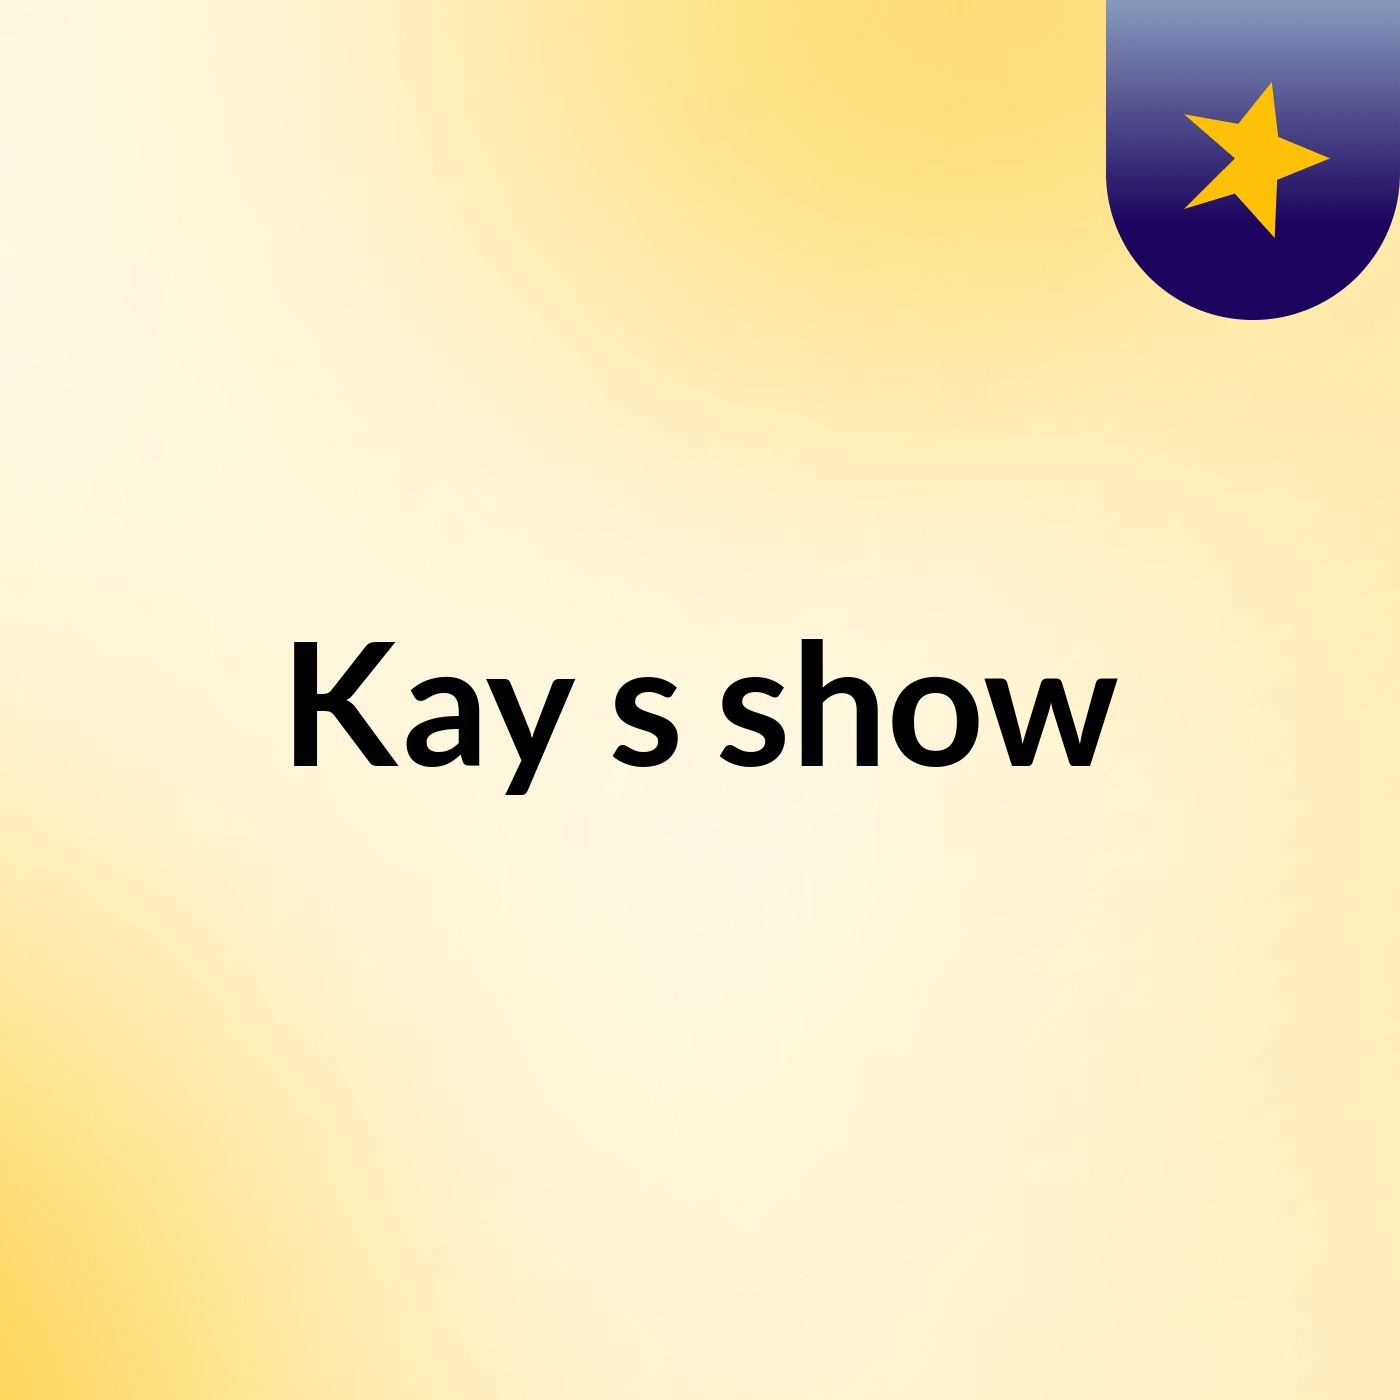 Episode 1 - Kay's show